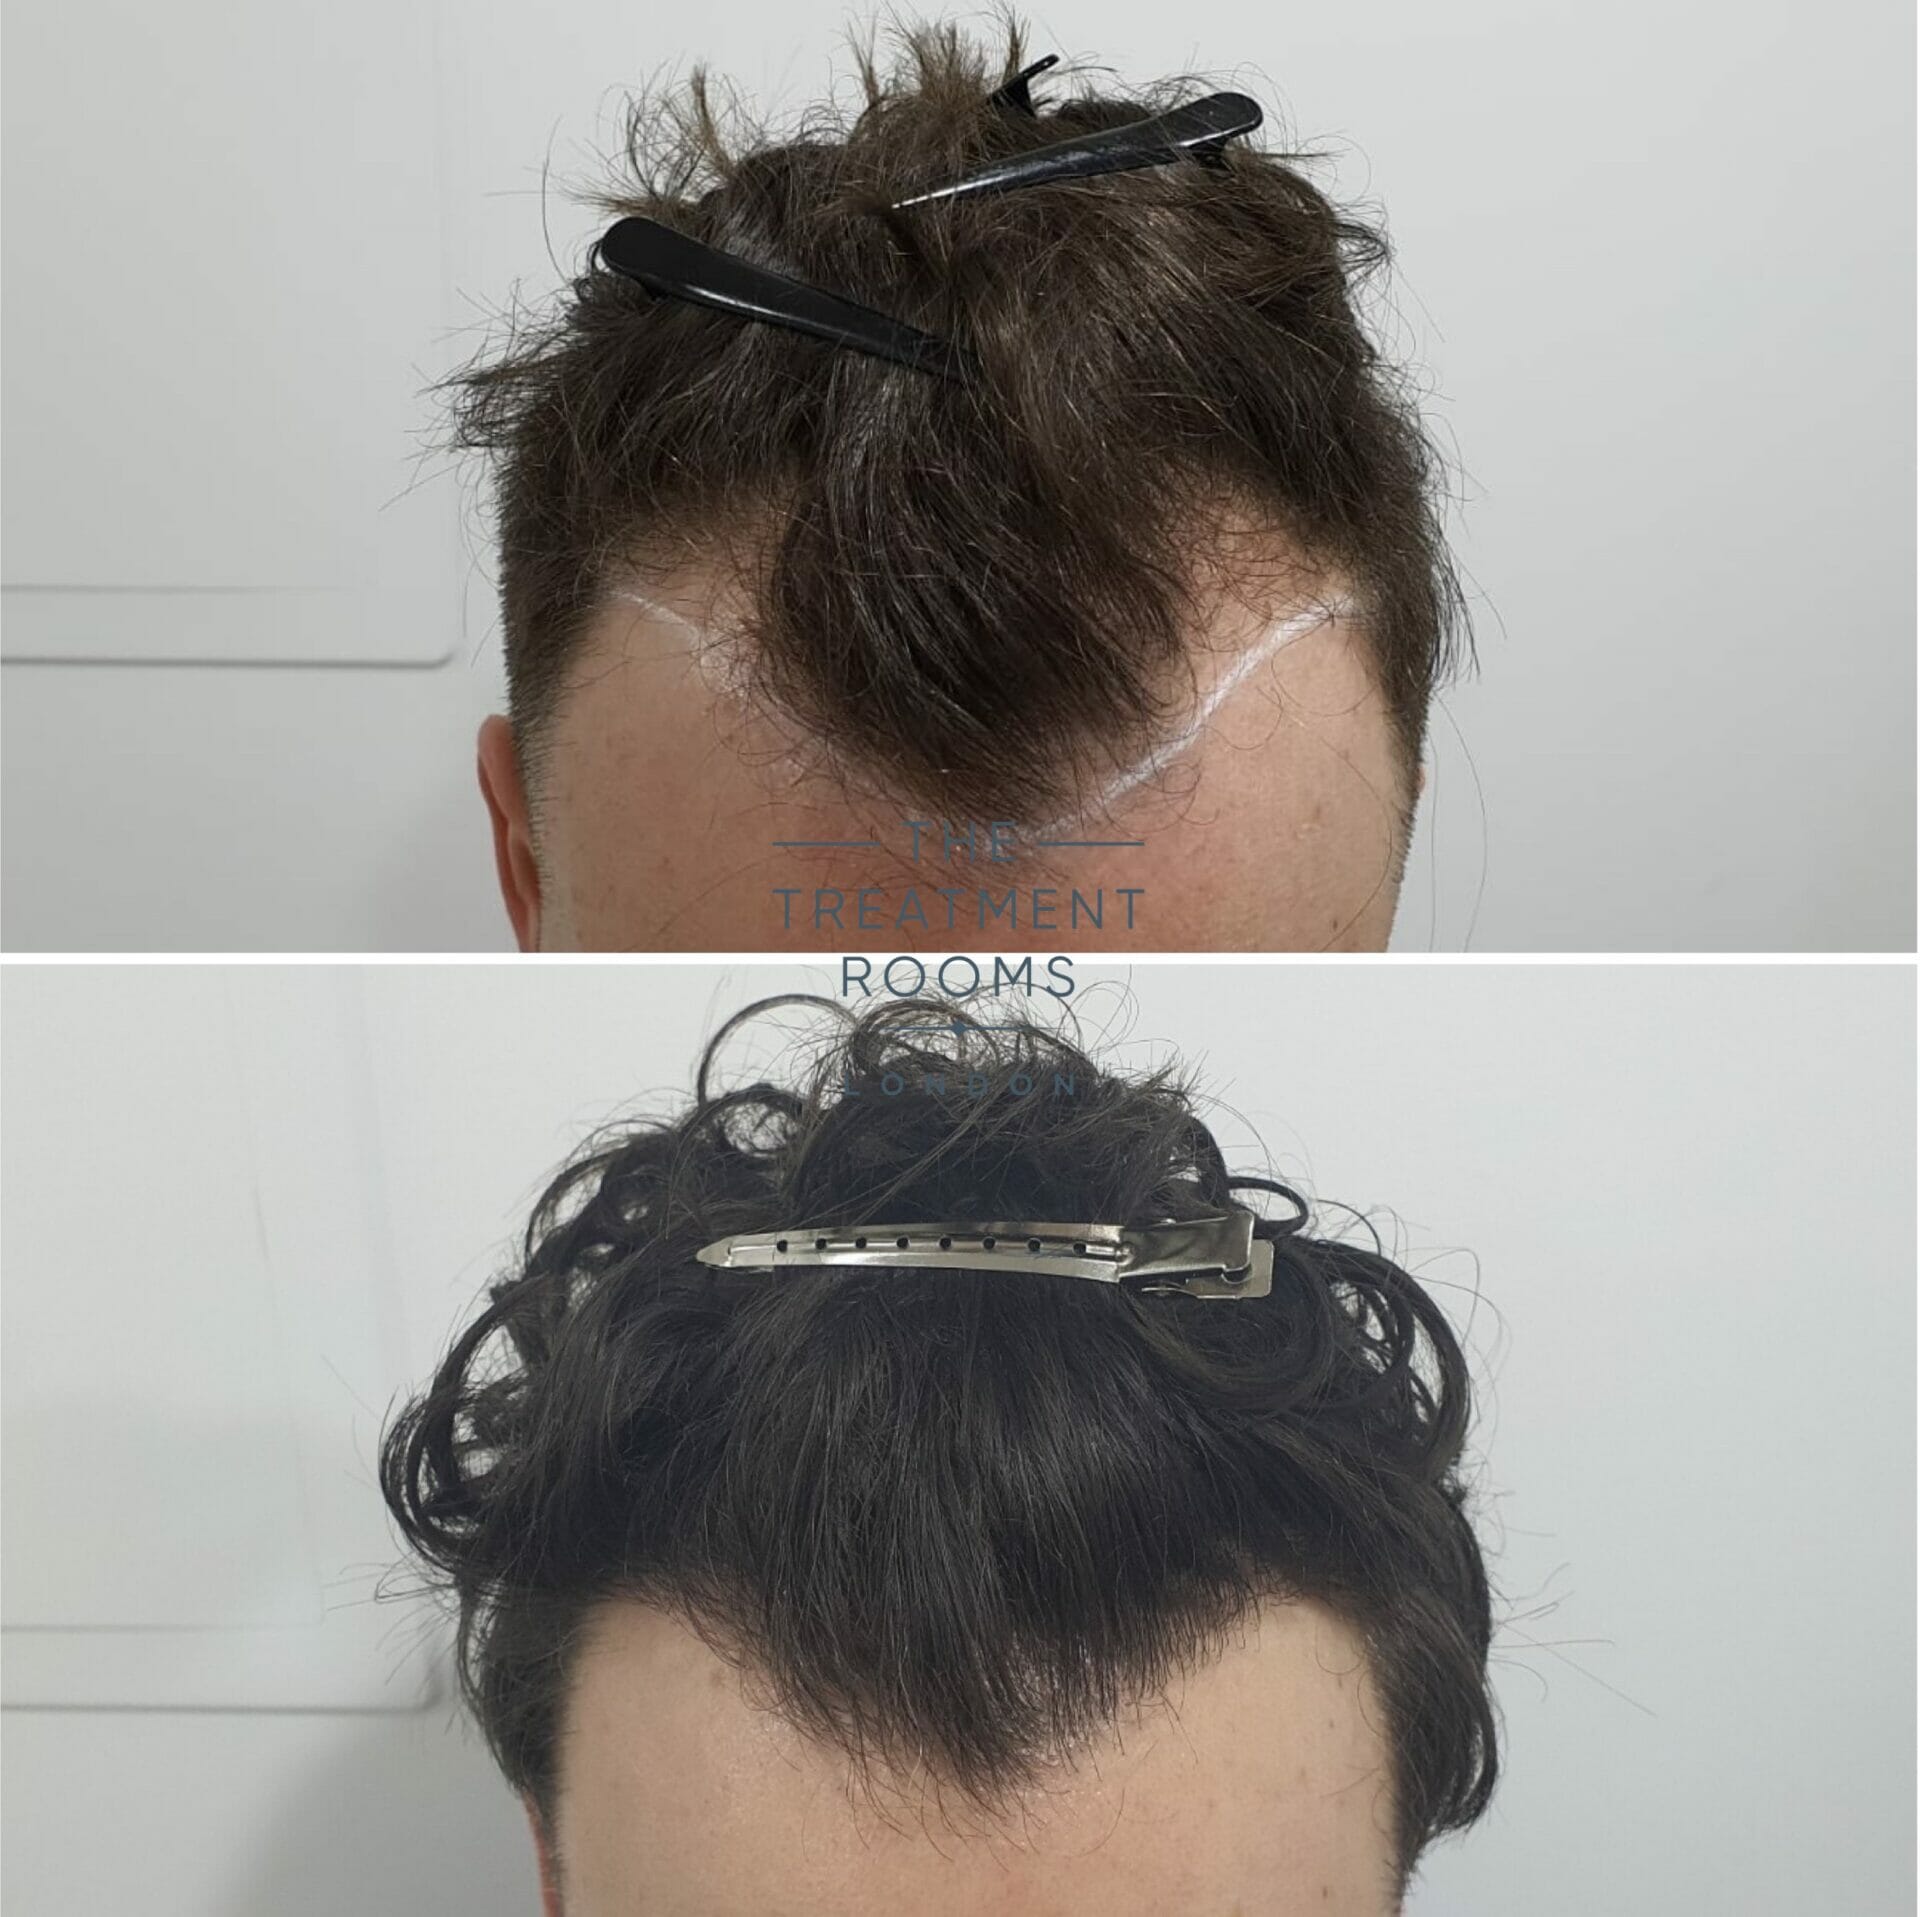 FUE Hair Transplant Result 1194 grafts - Treatment Rooms London